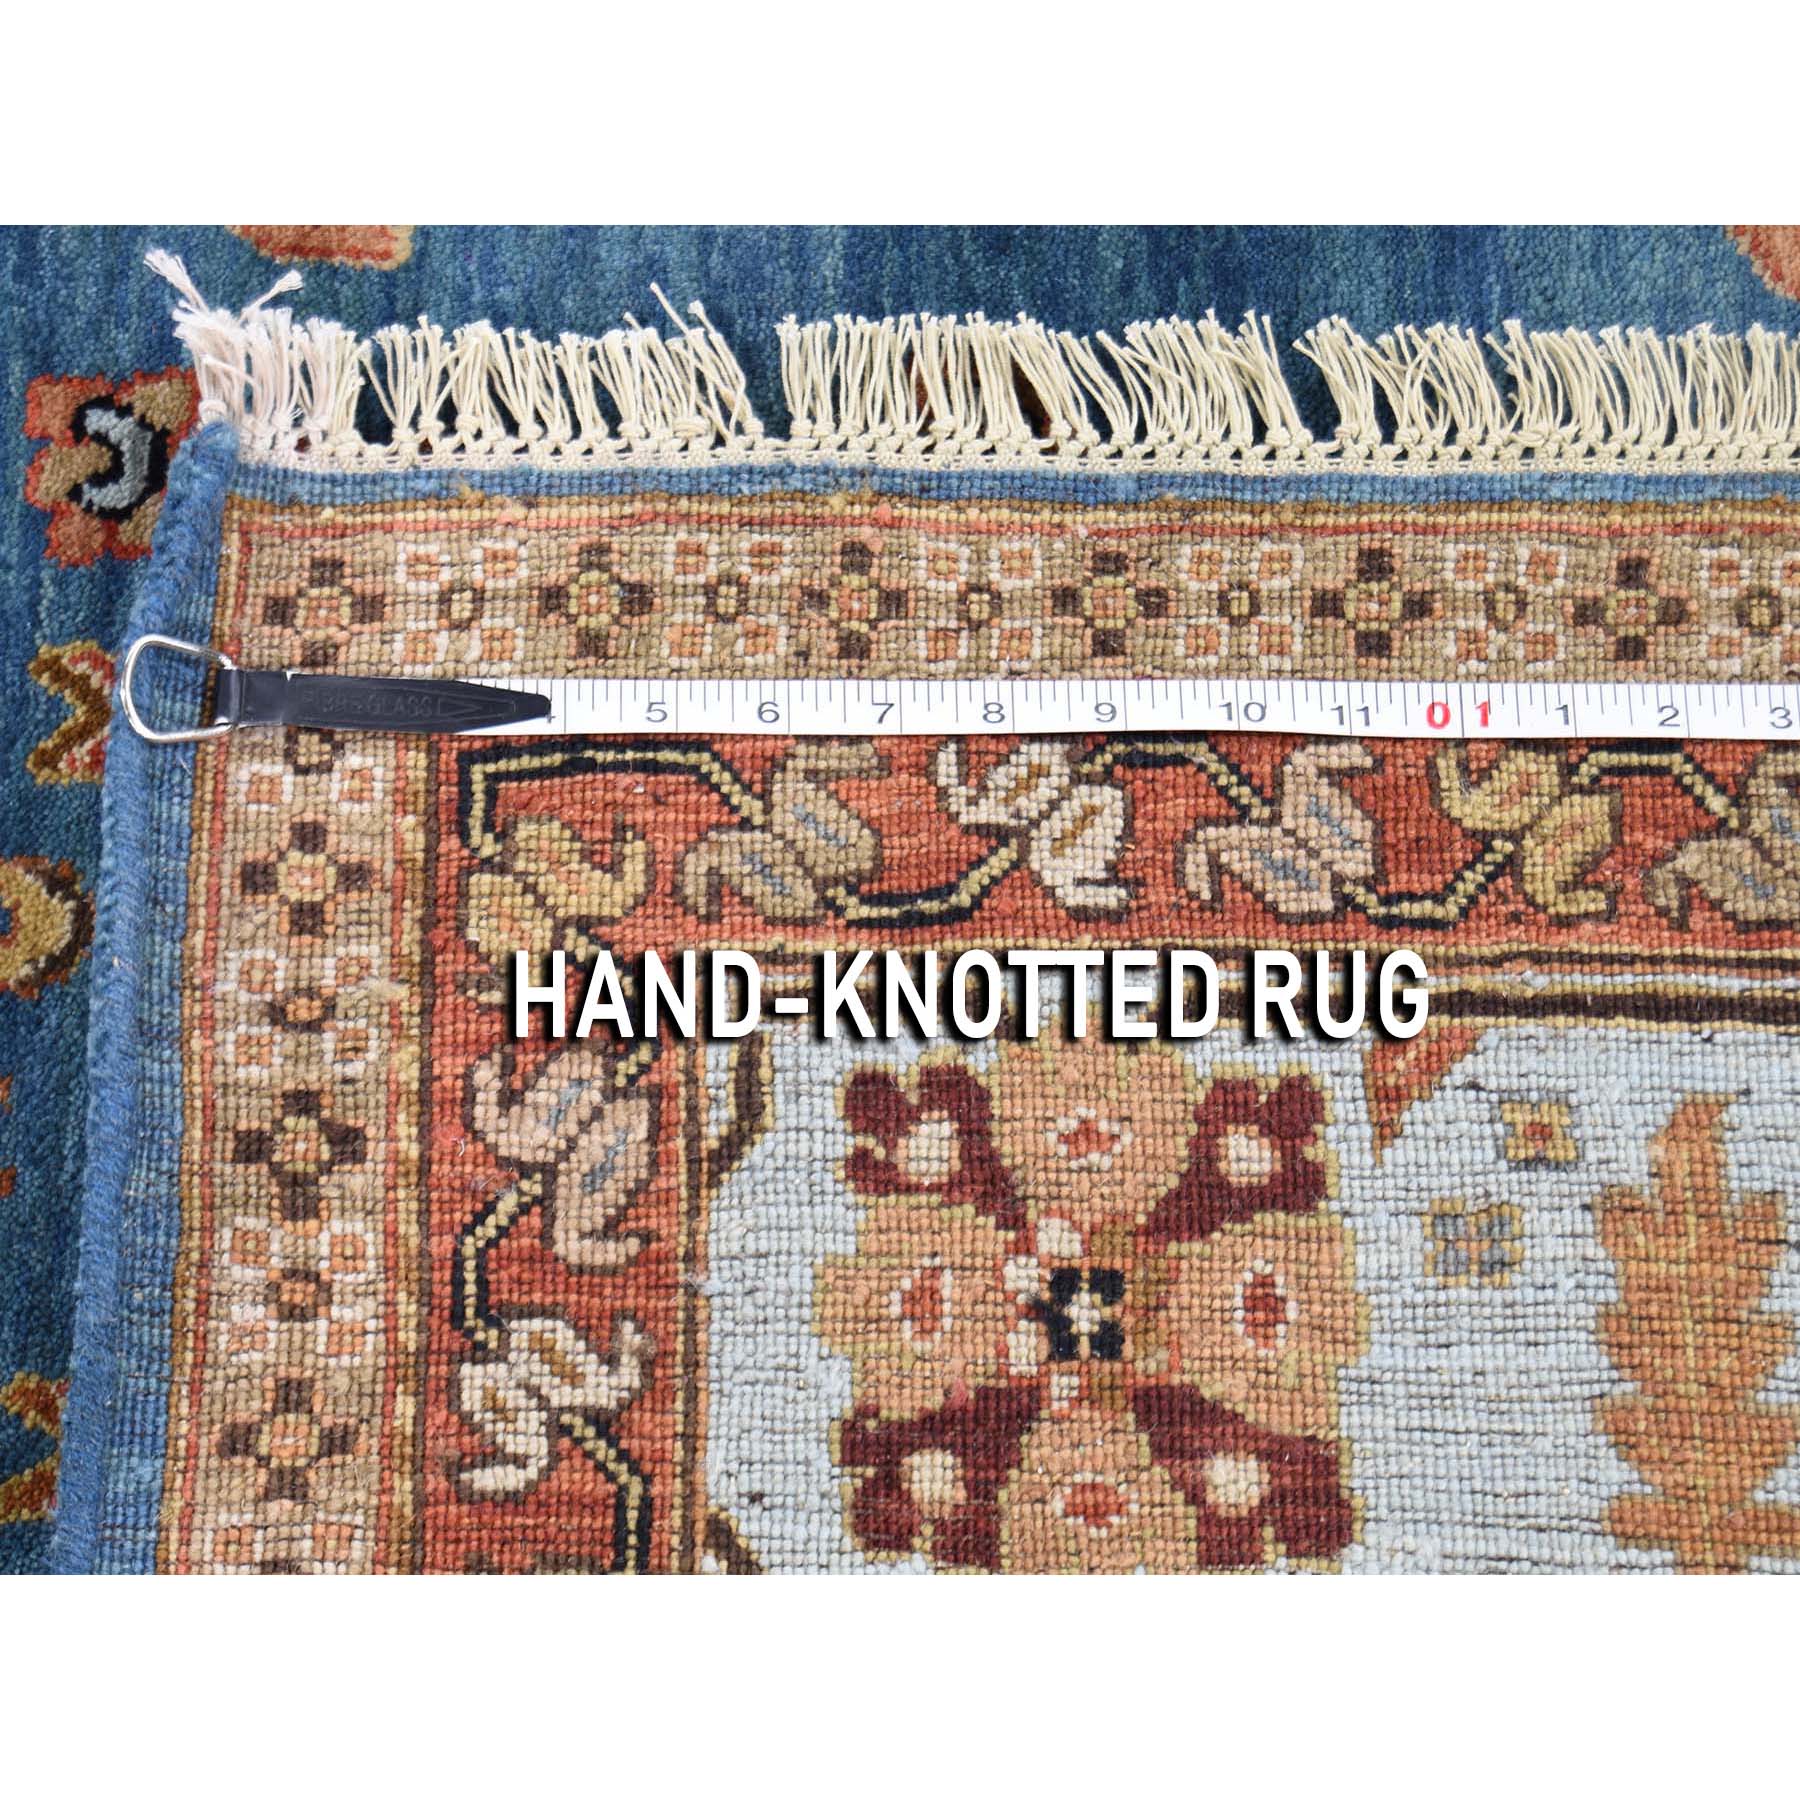 9-2 x11-7  Pure Wool Vegetable Dyes Bakshaish Hand-Knotted Oriental Rug 